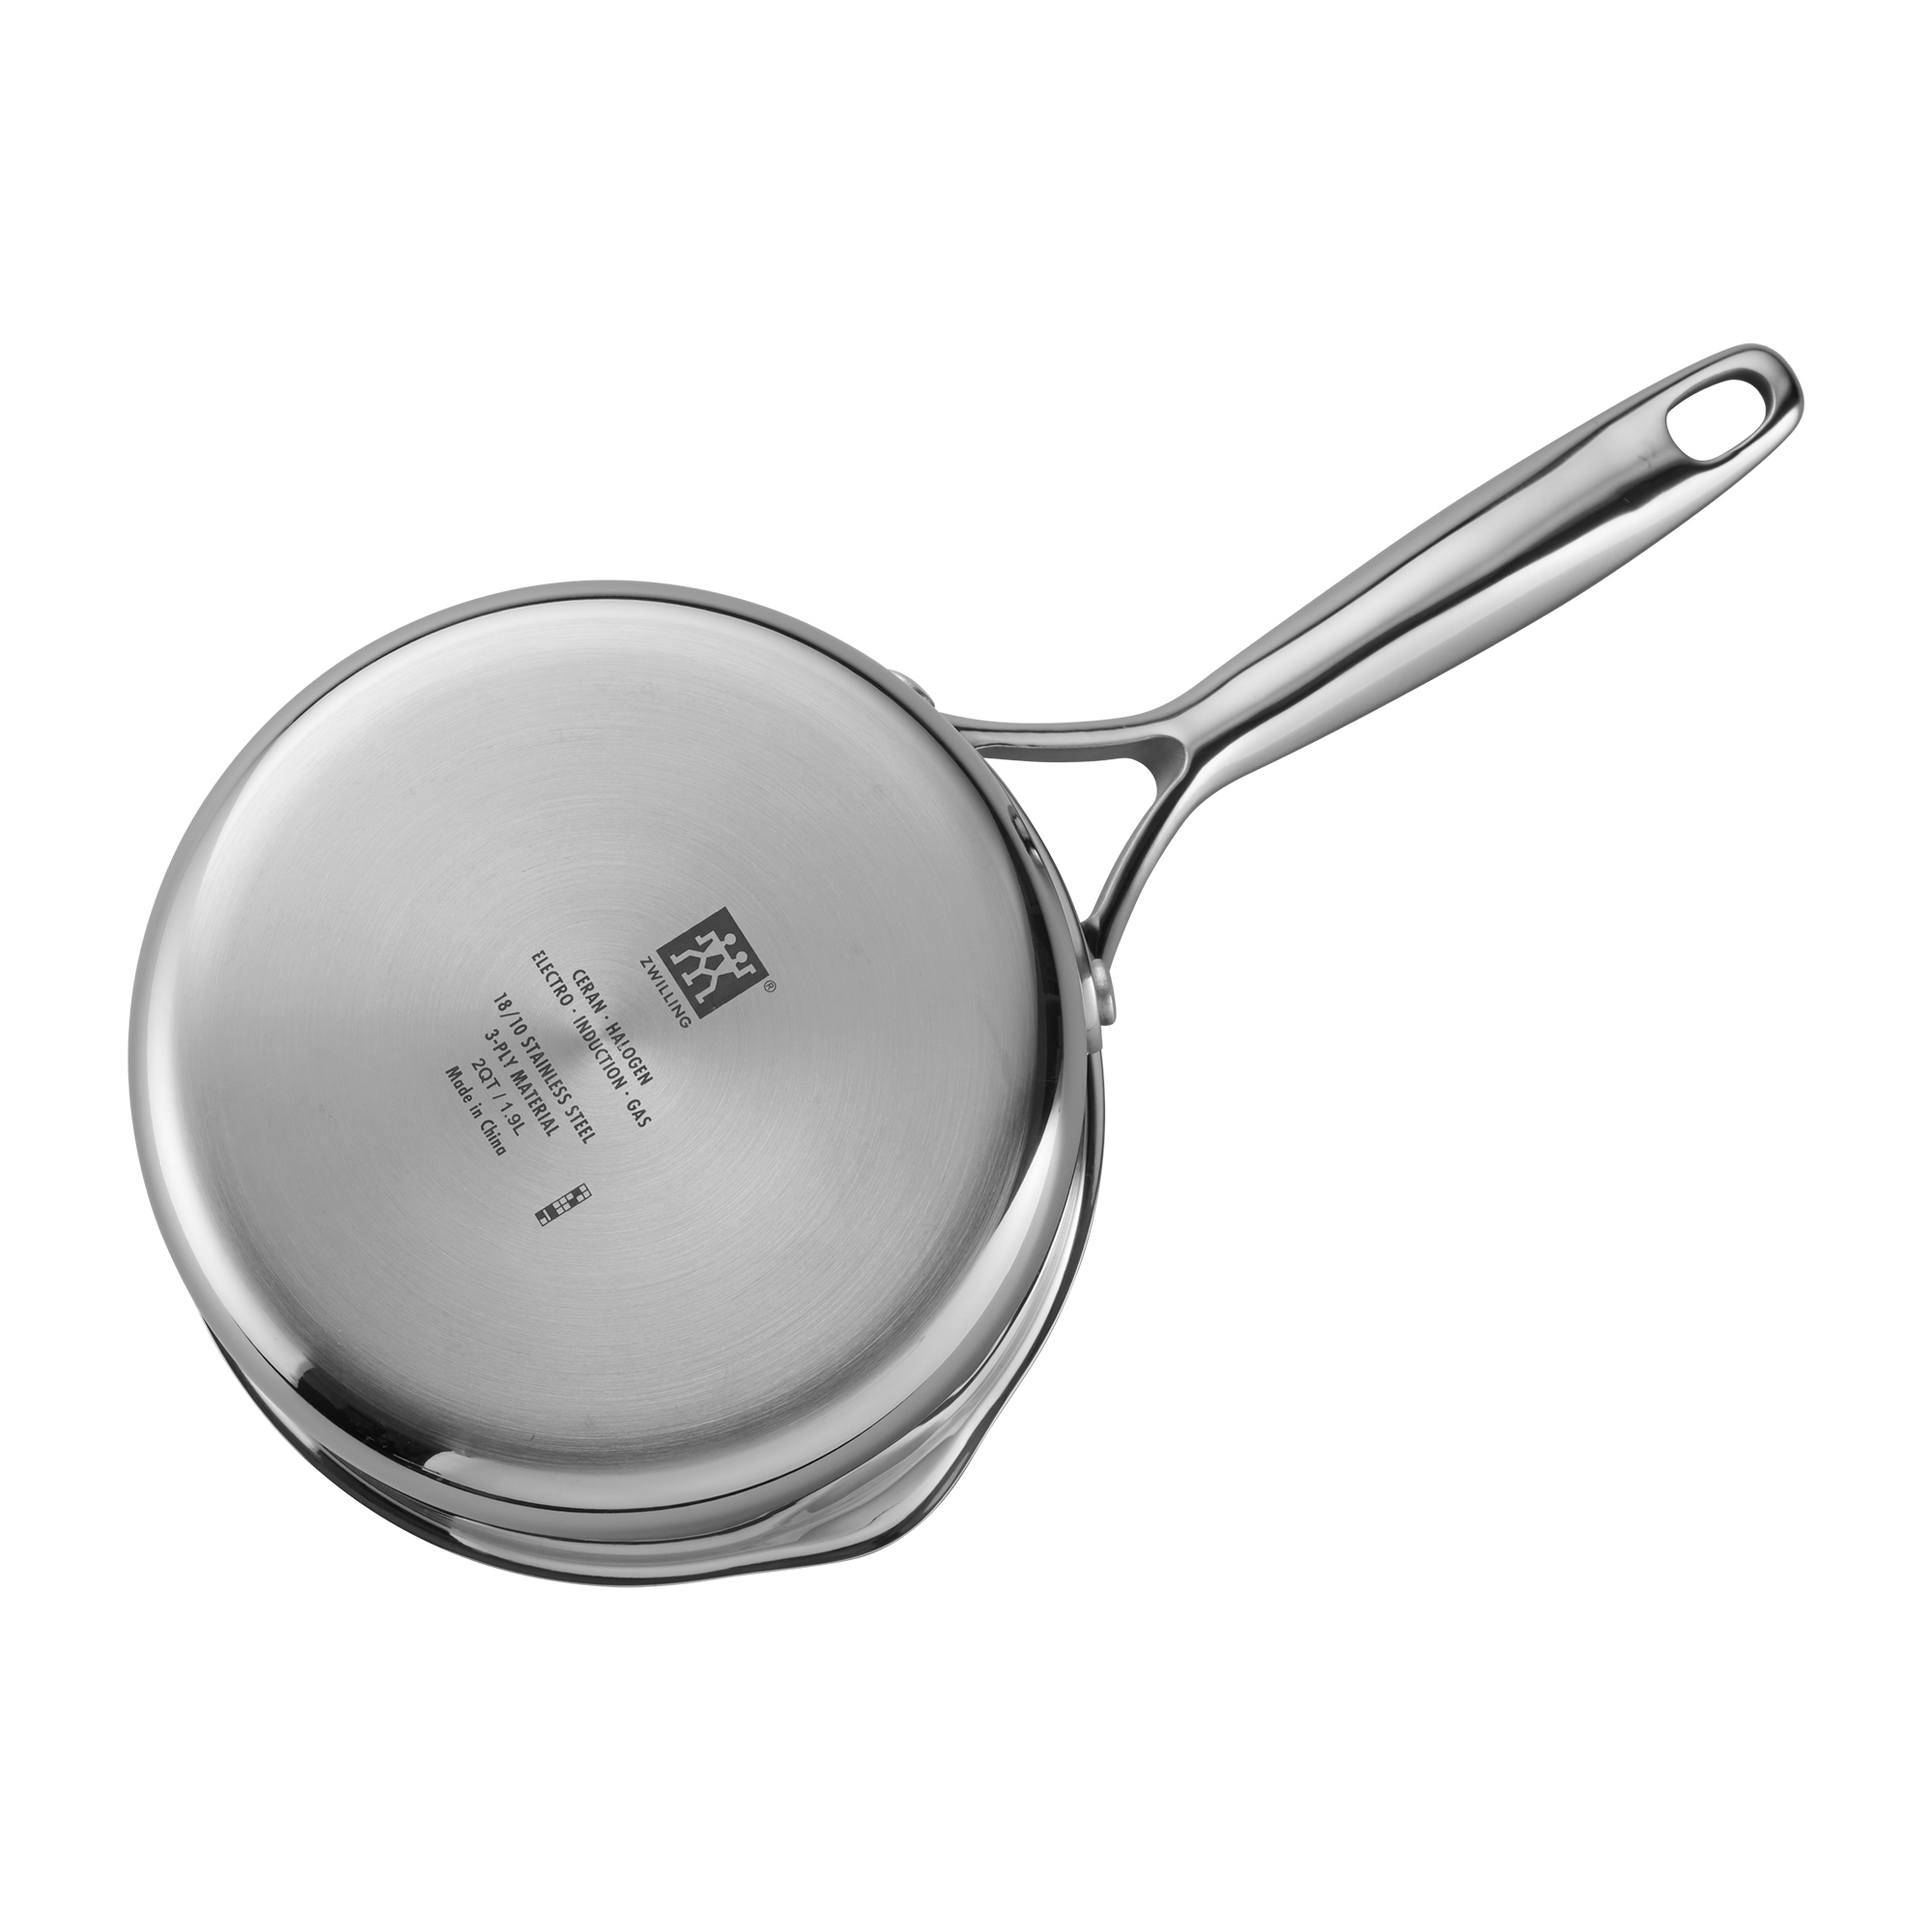 ZWILLING Energy Plus 2-qt Stainless Steel Ceramic Nonstick Tall Saucepan